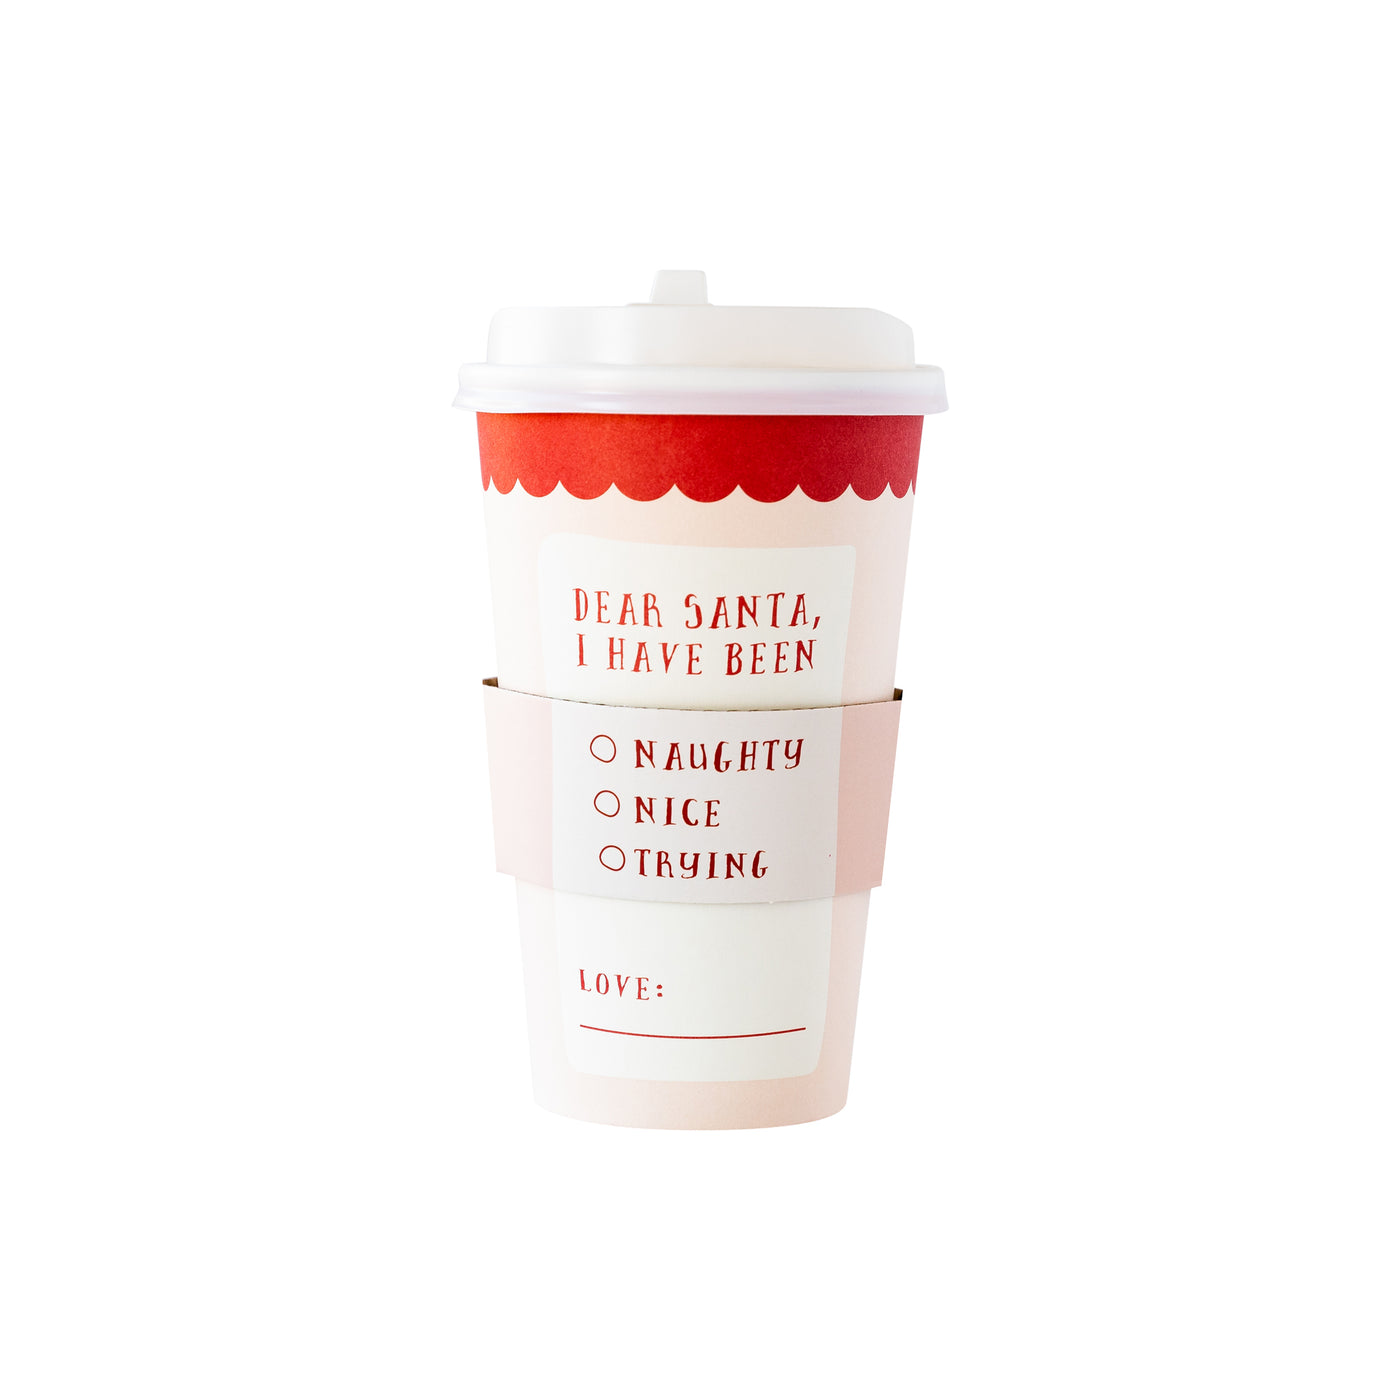 PLTG150 - Naughty Nice To-Go Cups 8 ct